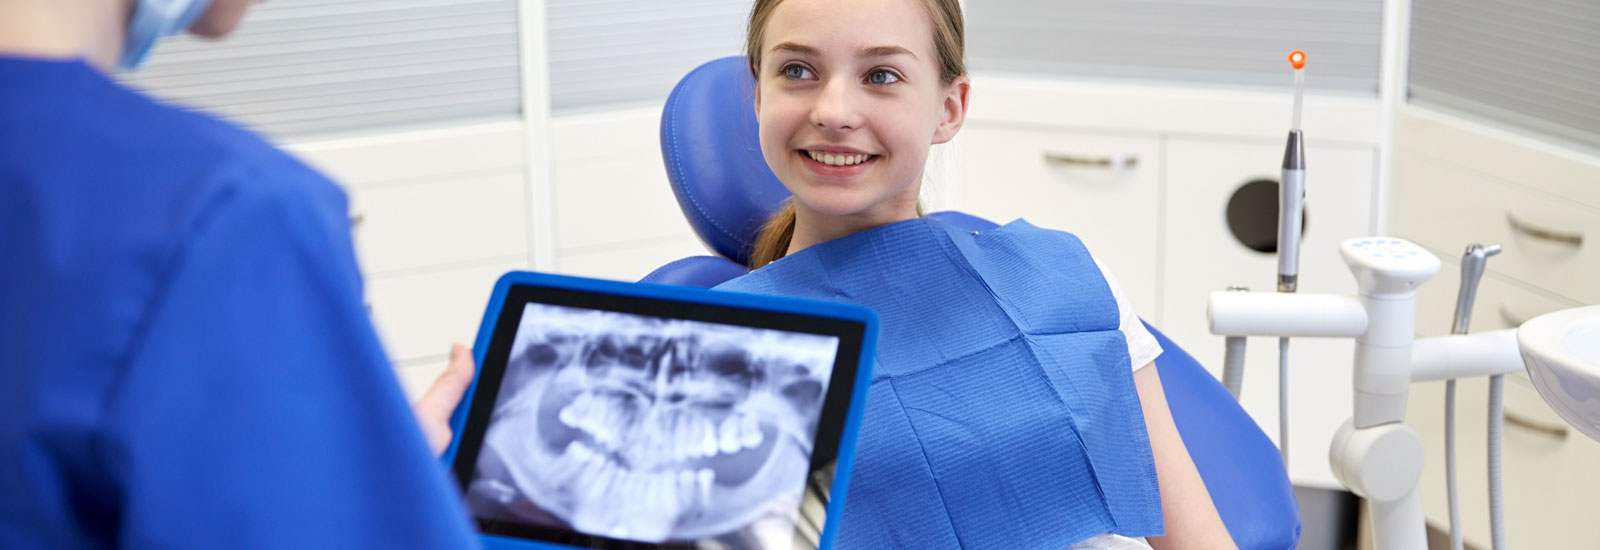 Dentist with x-ray on tablet pc